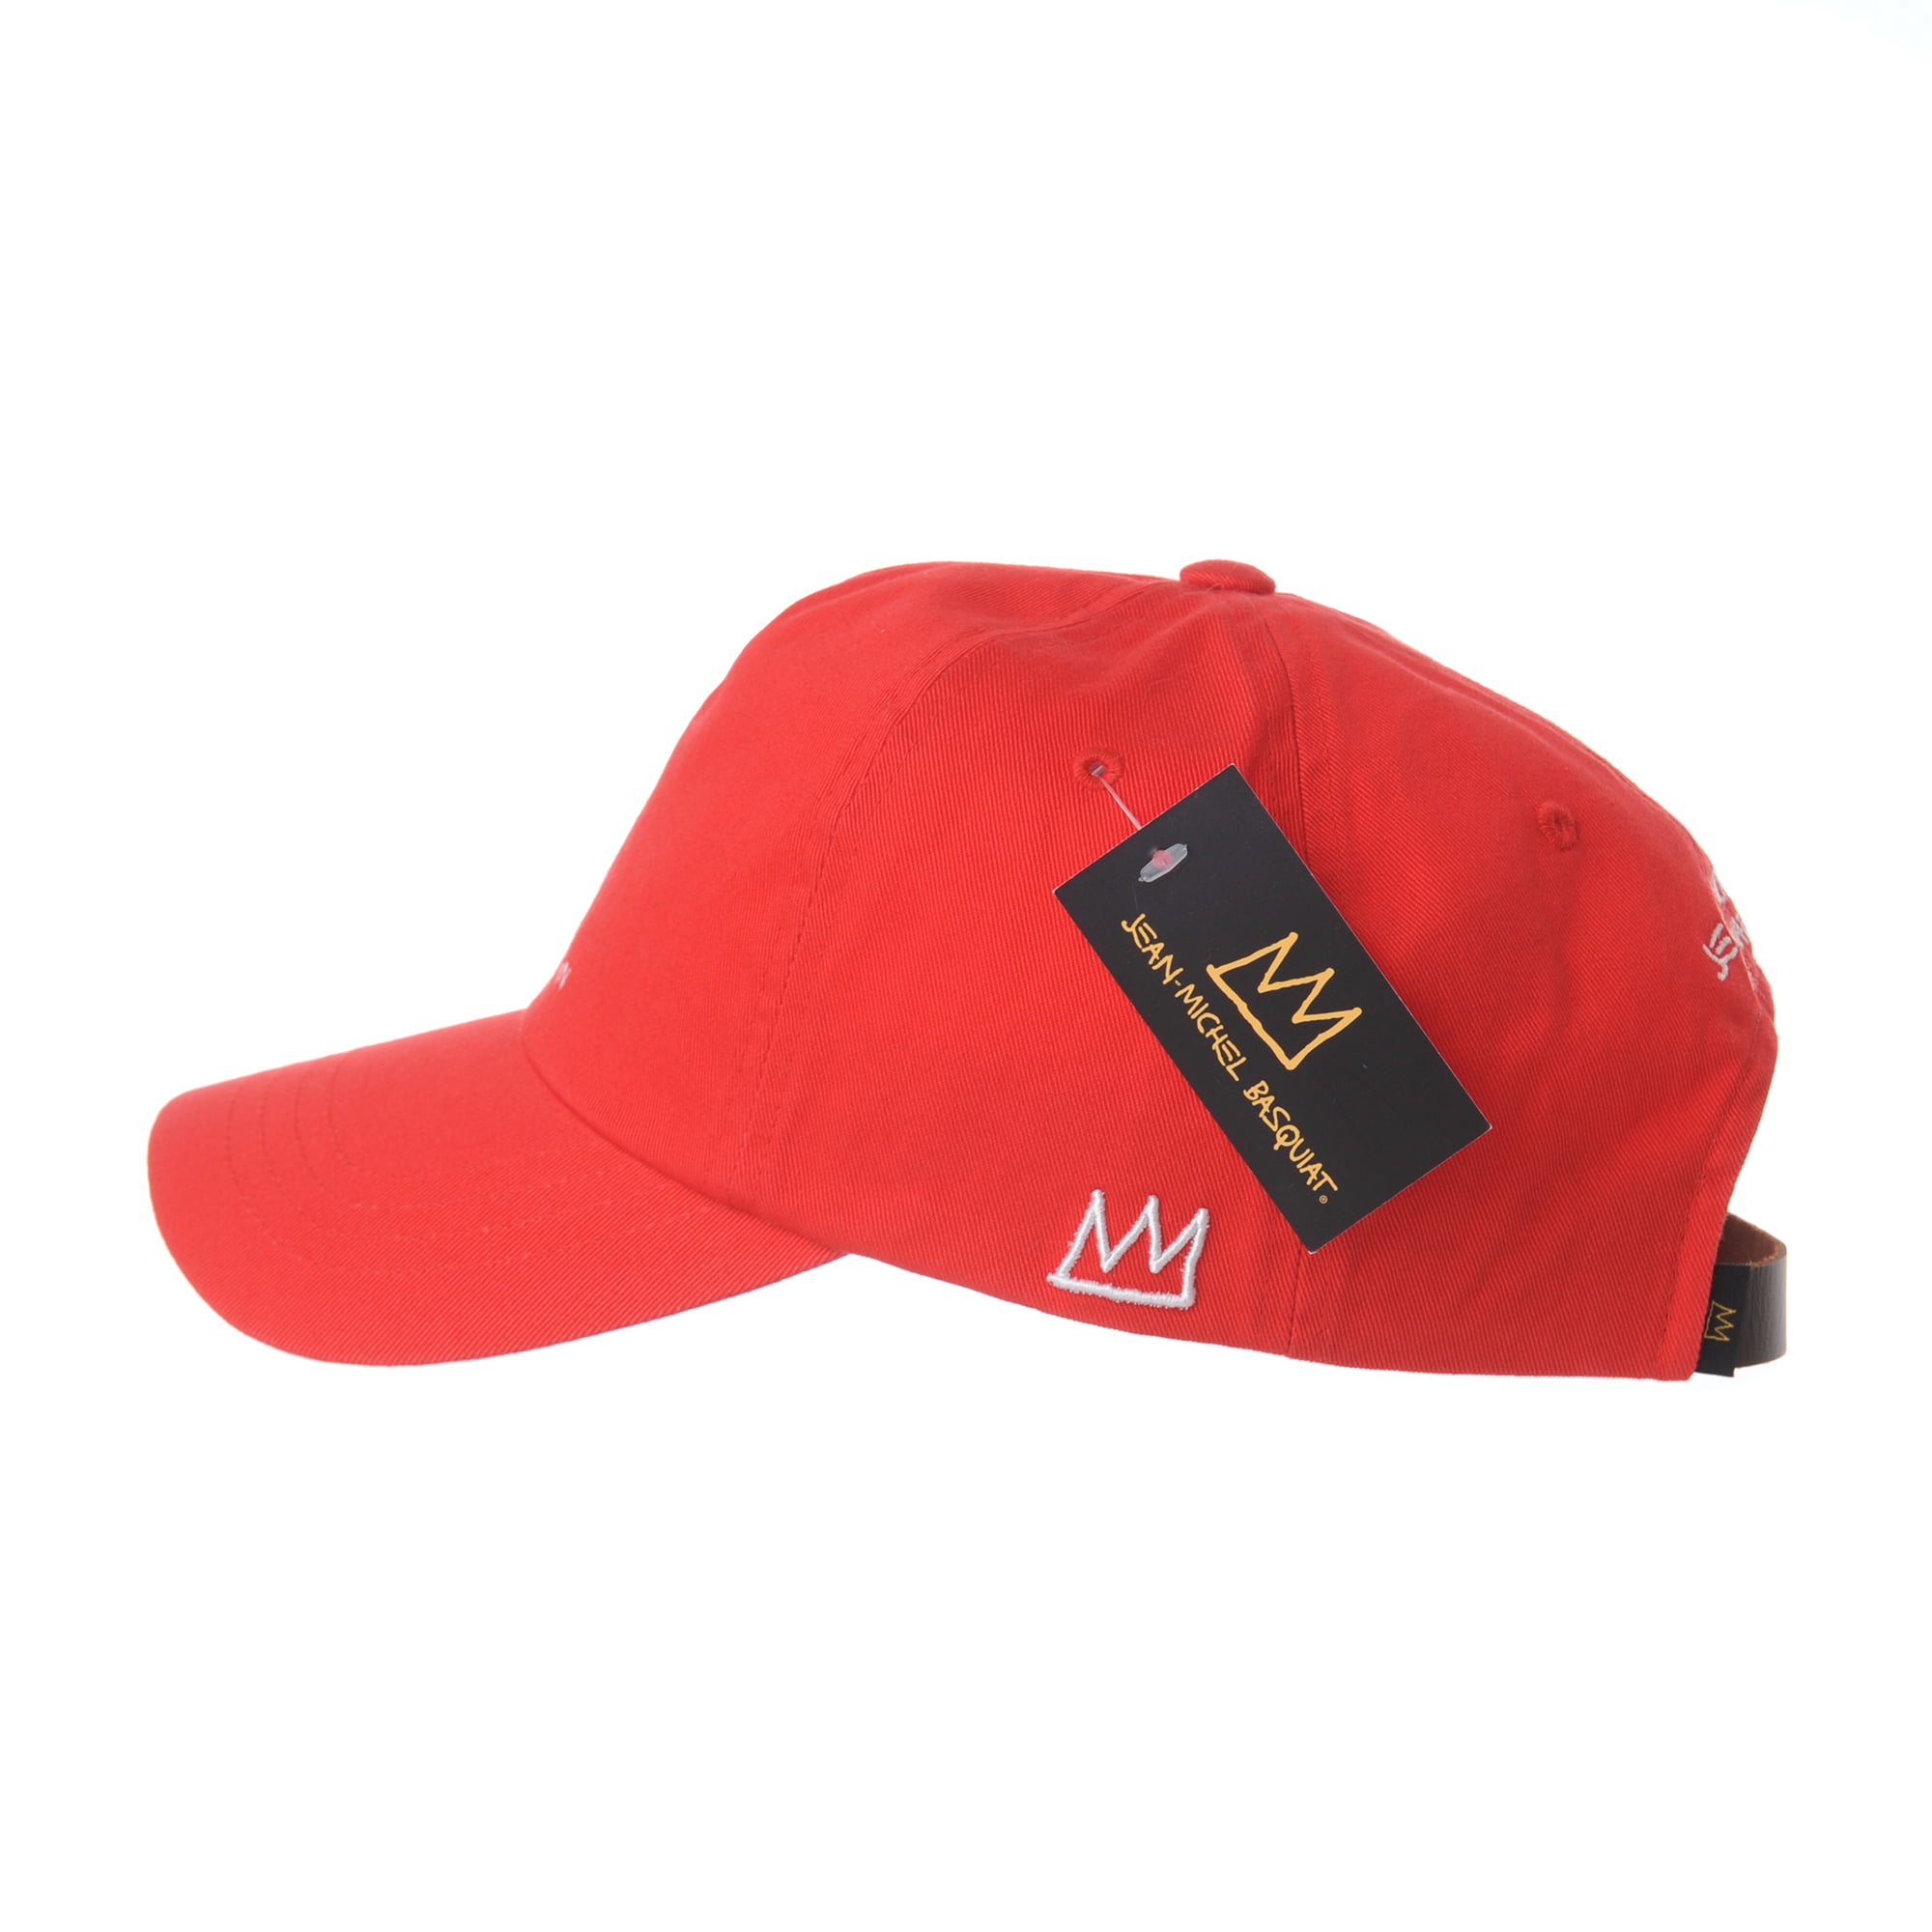 WITHMOONS Baseball Cap Jean-Michel Basquiat Crown Embroidery CR1616 (Red)